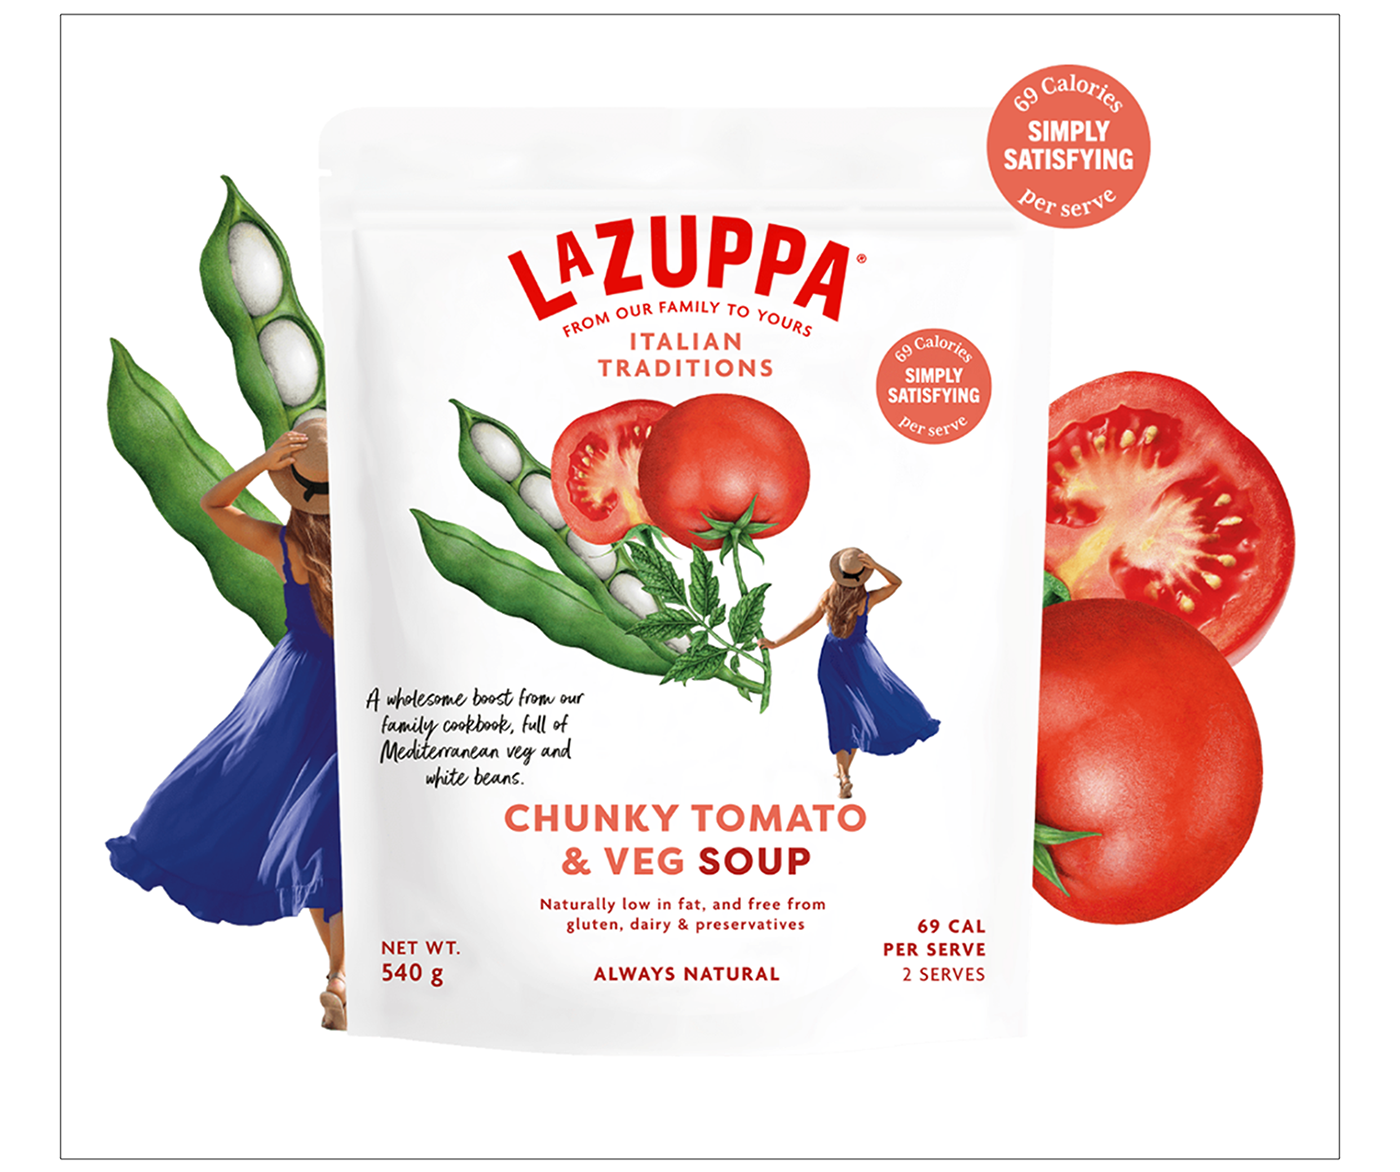 Tomato and white bean illustrations for La Zuppa soup packaging.